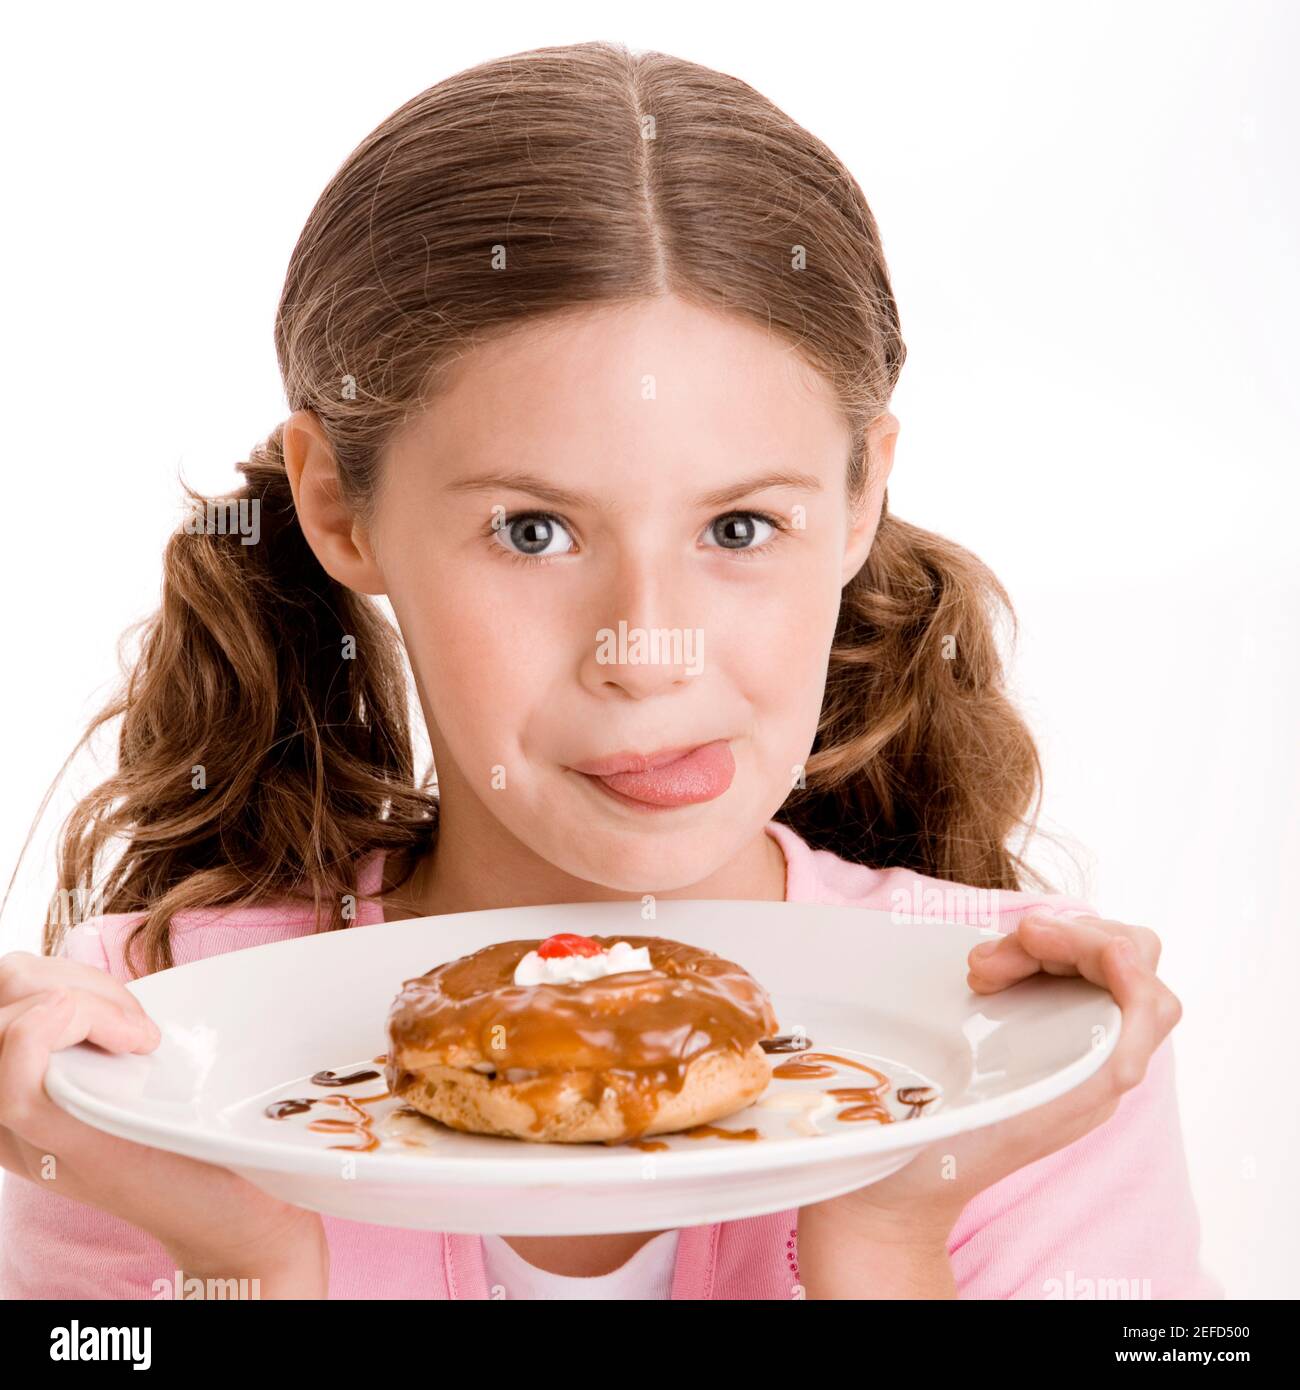 Portrait of a girl holding a donut in a plate licking her lips Stock Photo